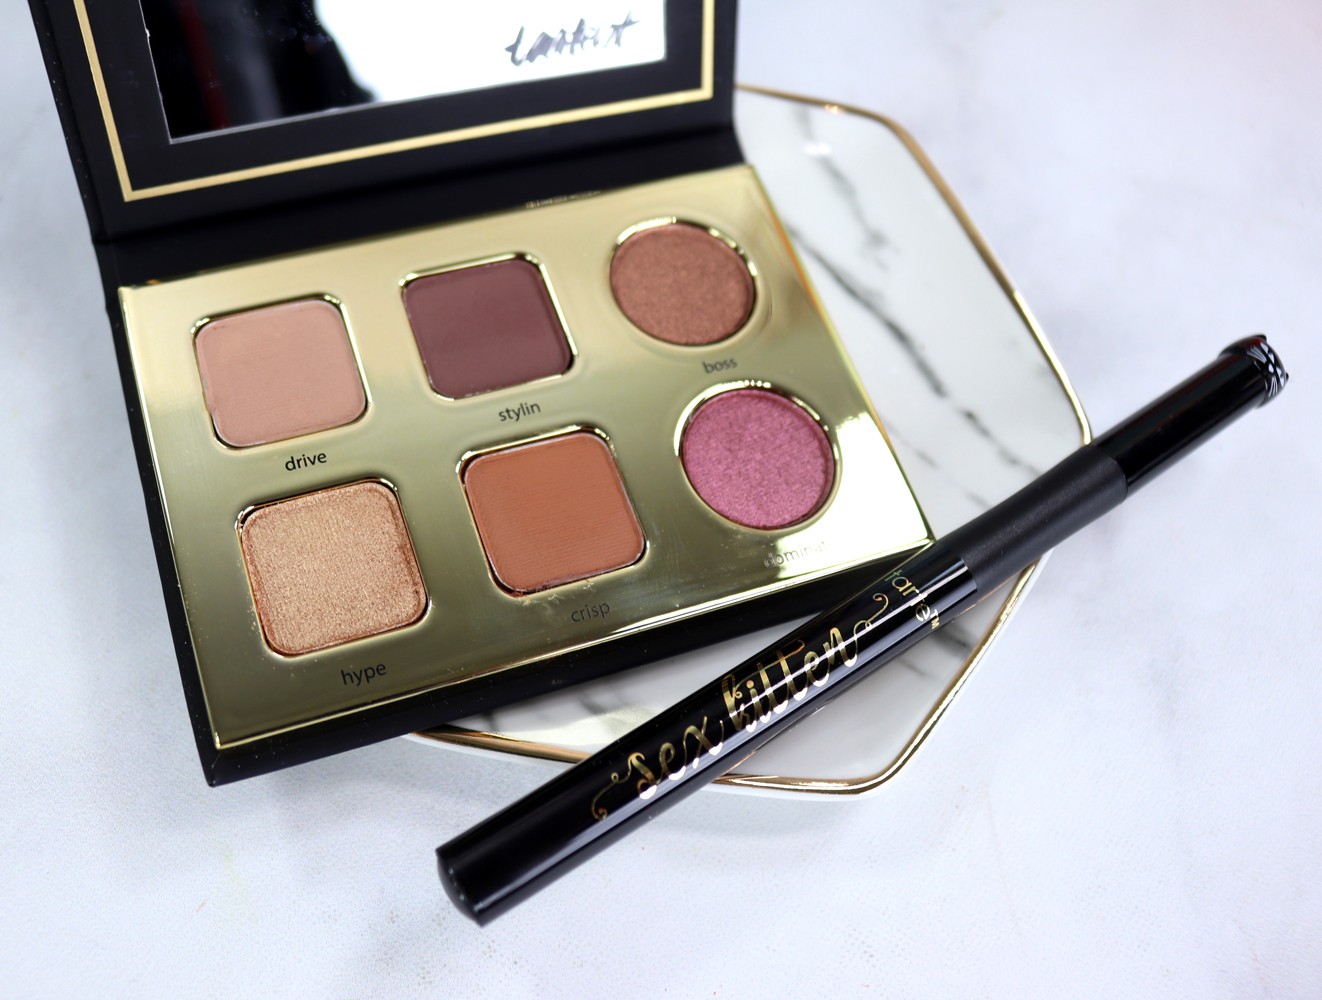 Tarte Tarteist Pro to Go Palette and Sex Kitten Liquid Liner in the Summer 2018 FabFitFun Box - FabFitFun Summer 2018 Unboxing and Giveaway featured by popular Los Angeles style blogger, My Beauty Bunny